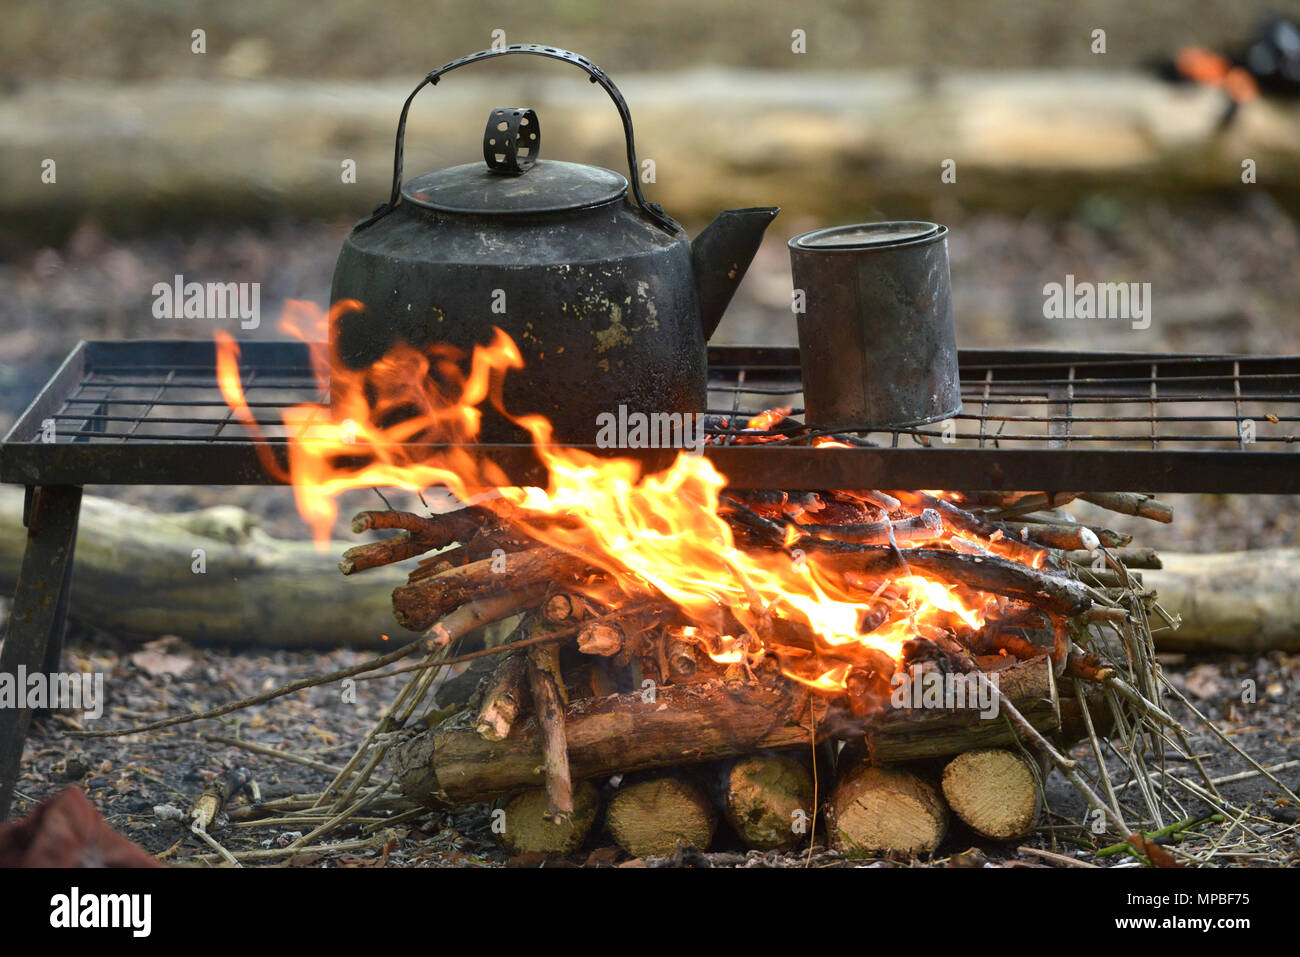 https://c8.alamy.com/comp/MPBF75/blackened-kettle-on-an-open-campfire-MPBF75.jpg